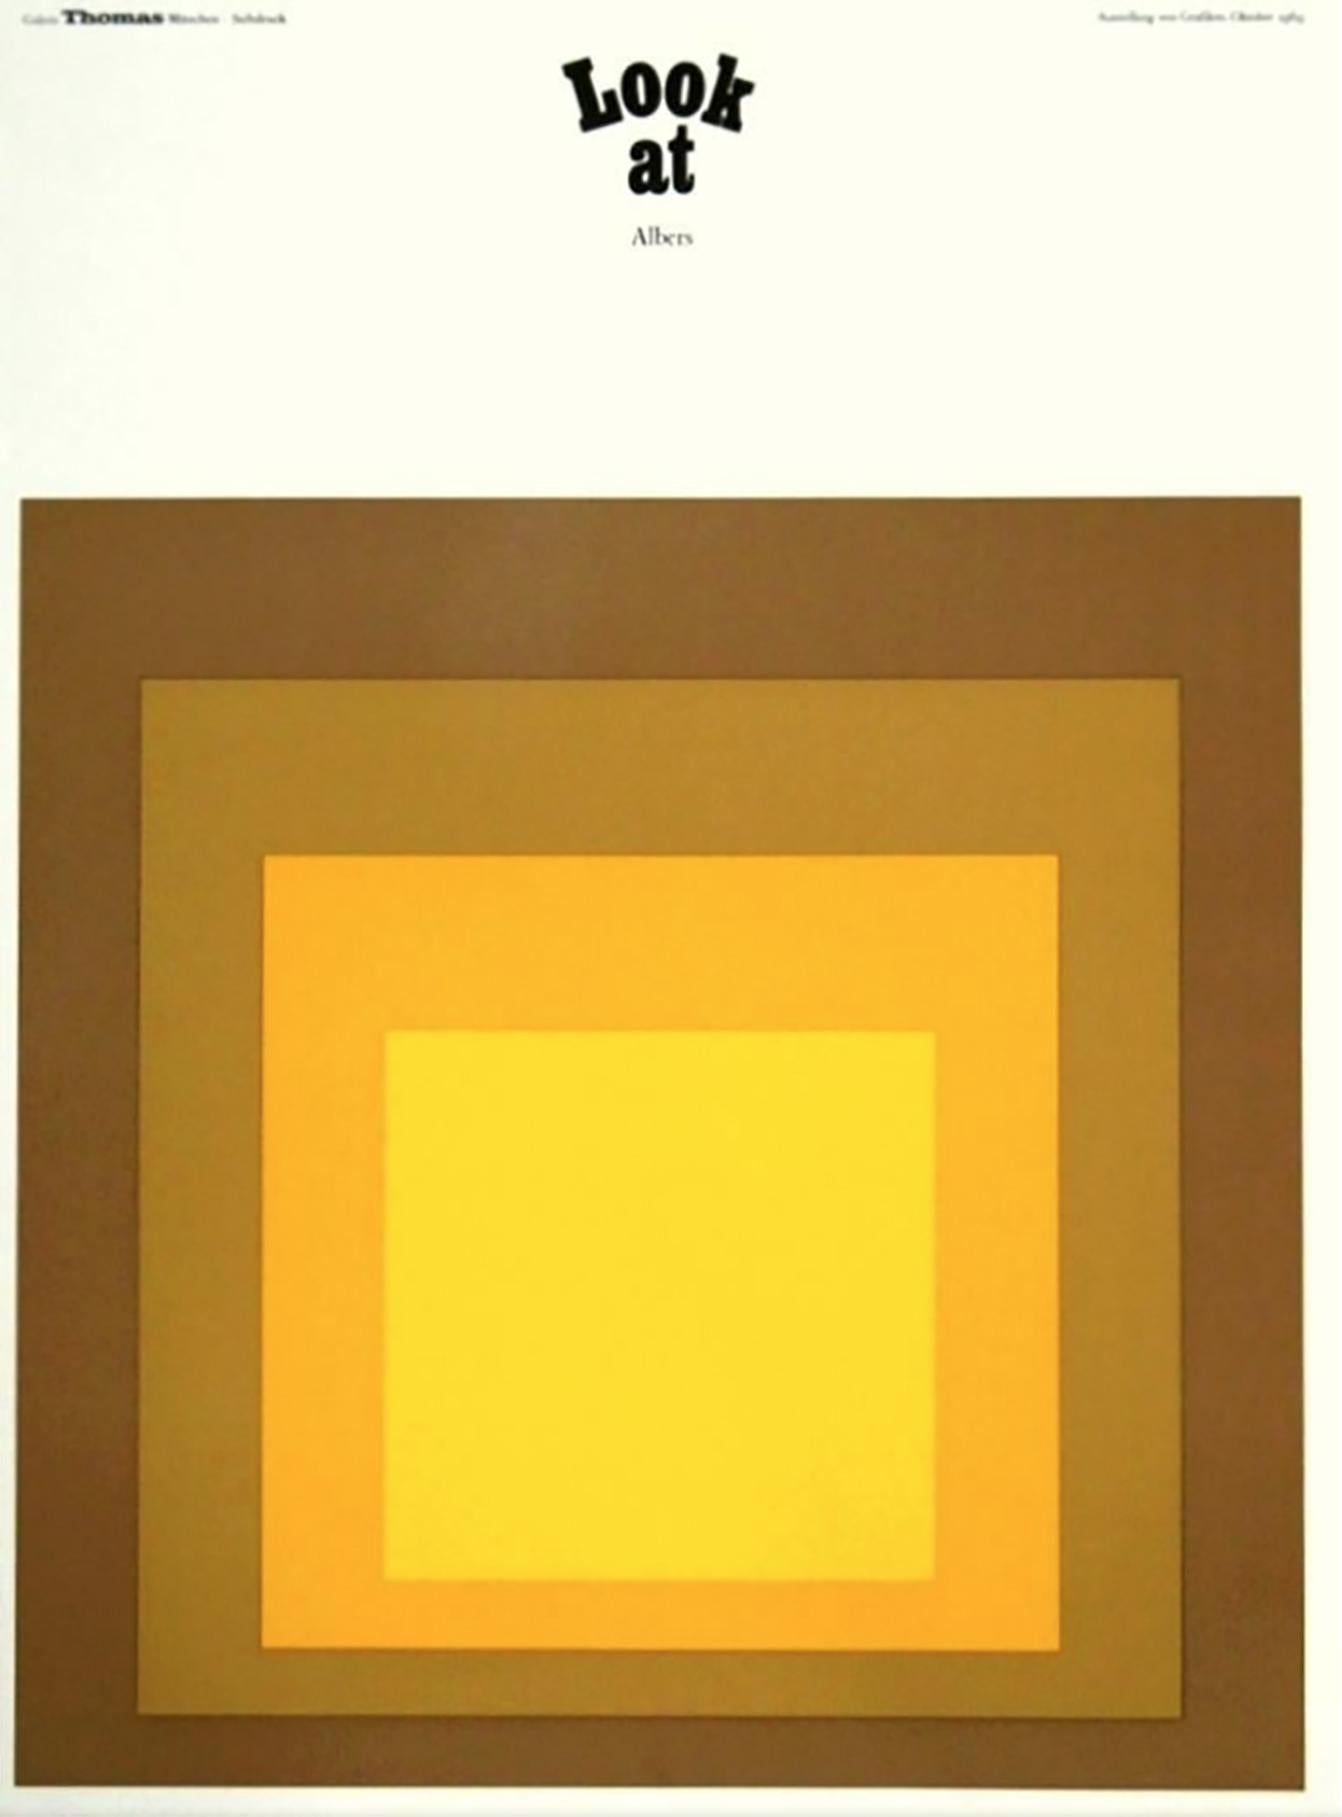 Josef Albers Homage to the Square poster (Albers prints) - Print by (after) Josef Albers